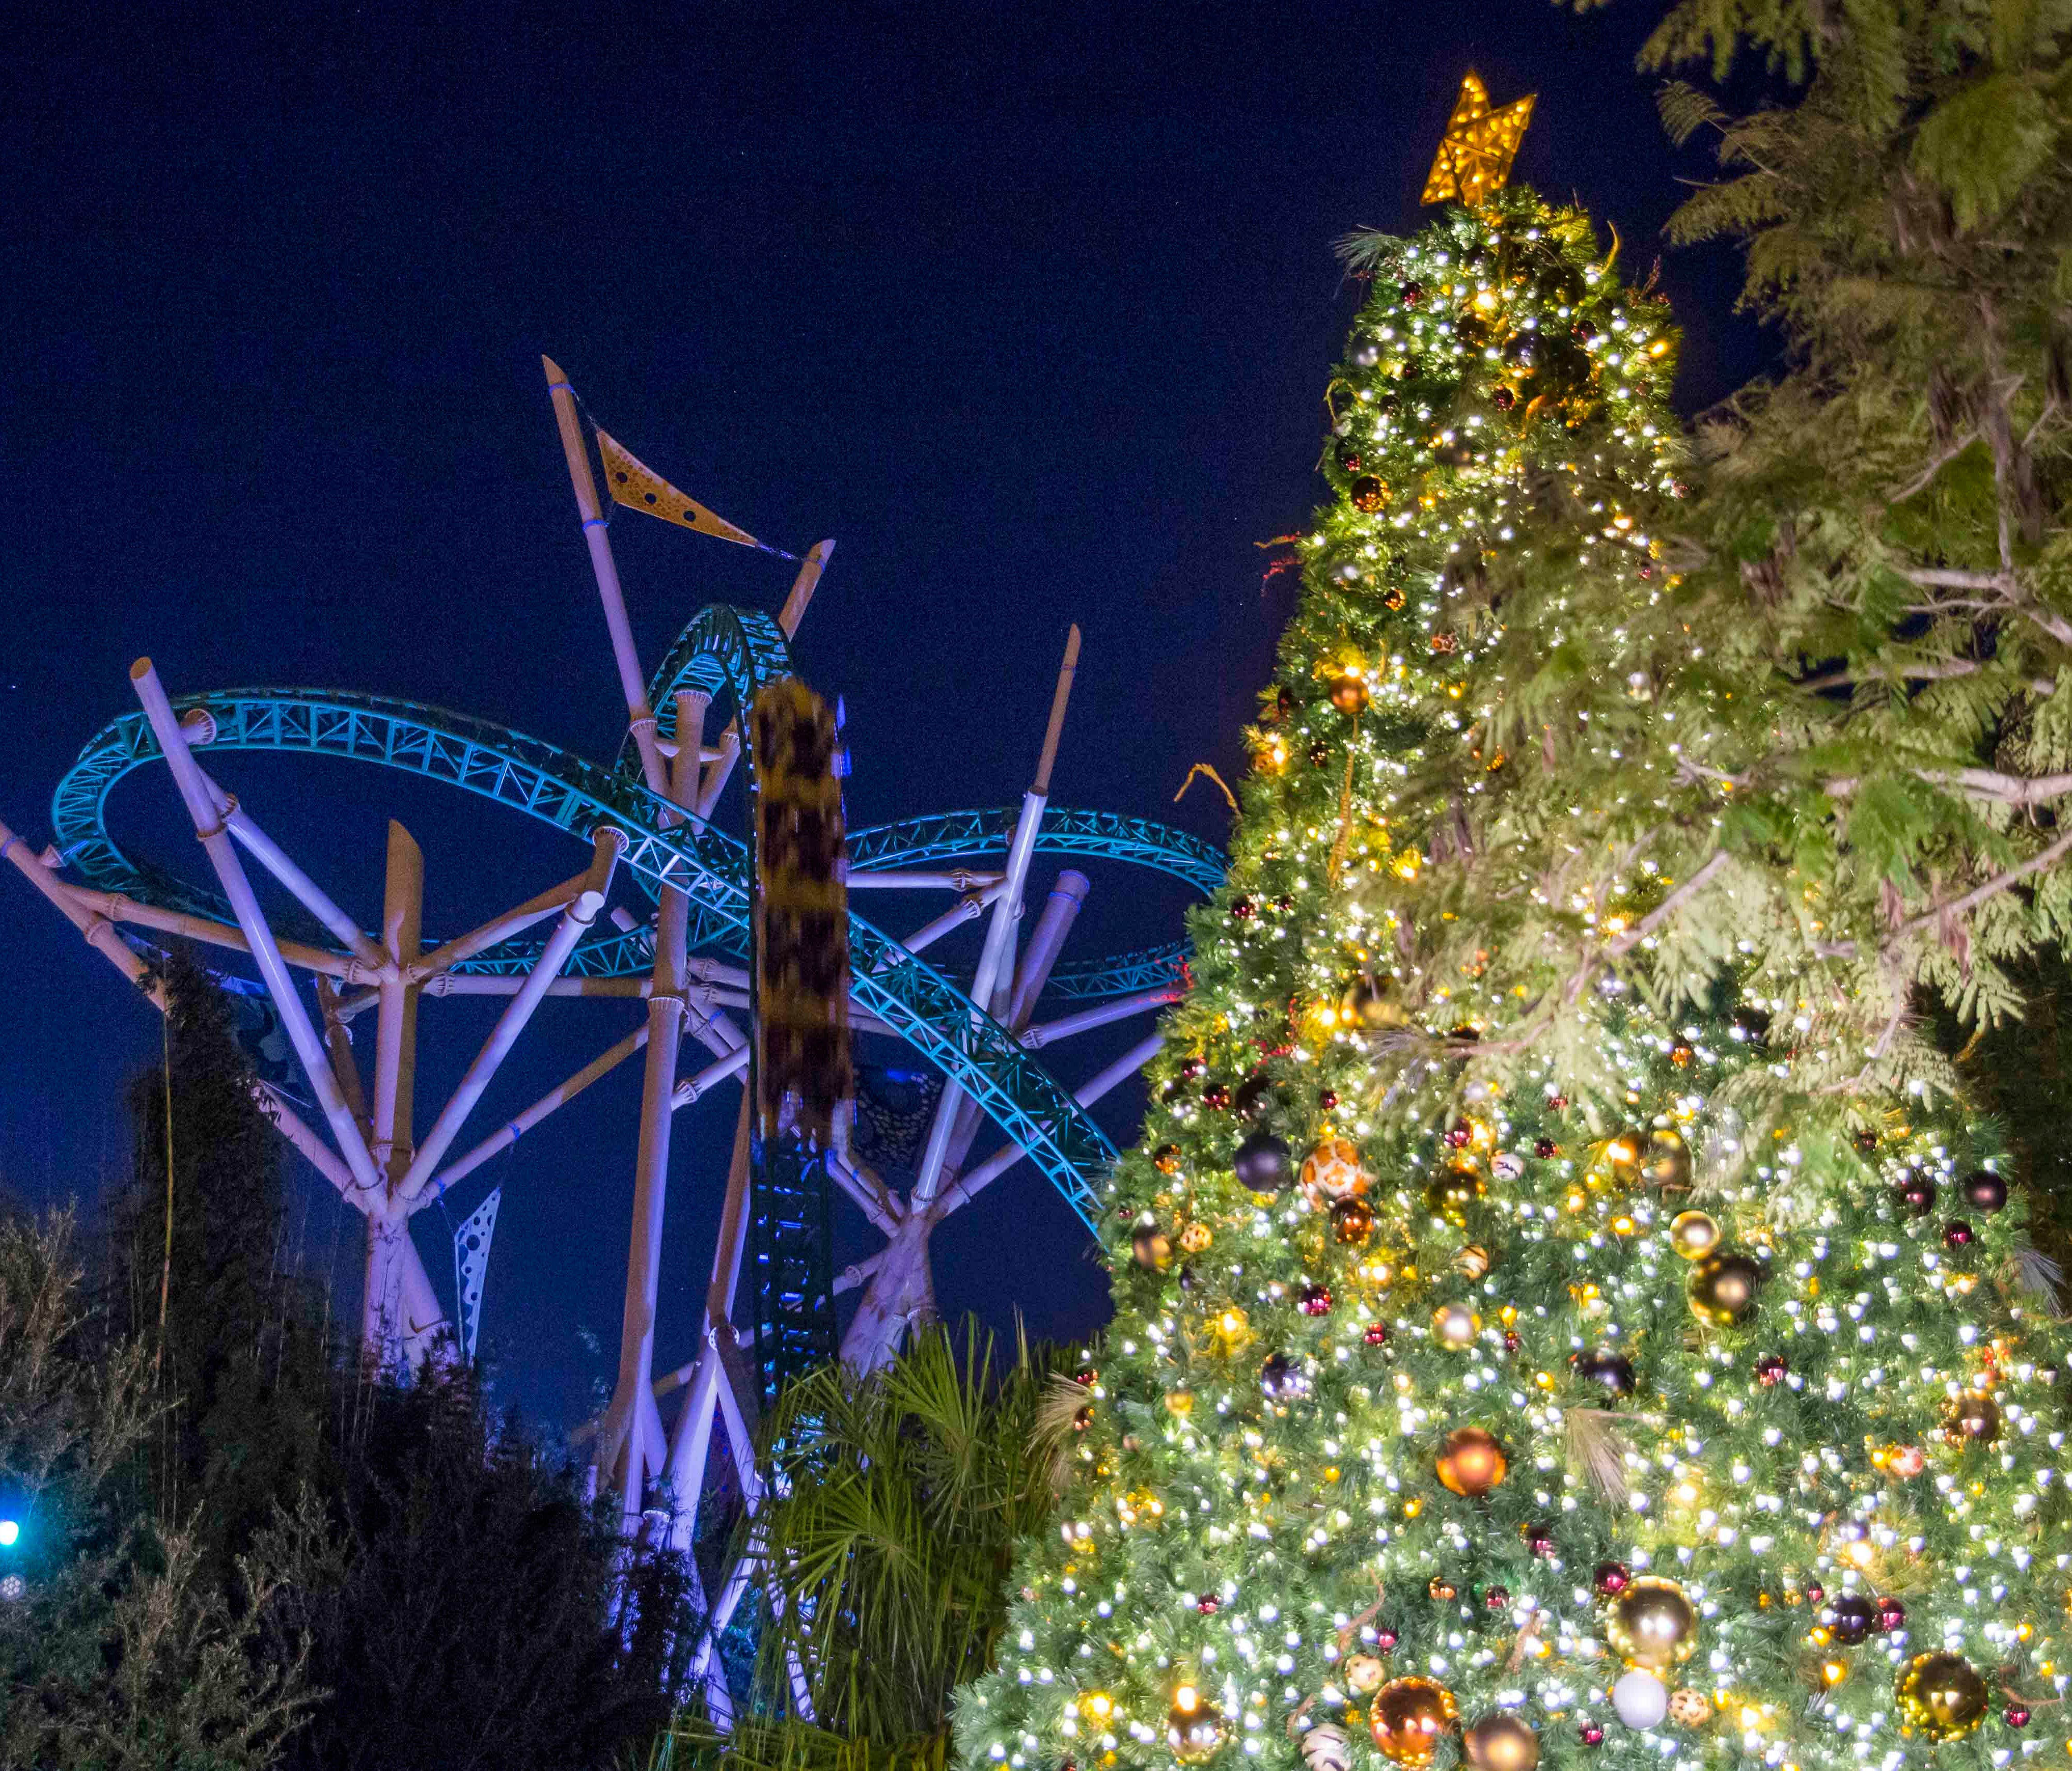 Busch Gardens Tampa in Florida will also transform into Christmas Town on select days from November 19 to January 2.